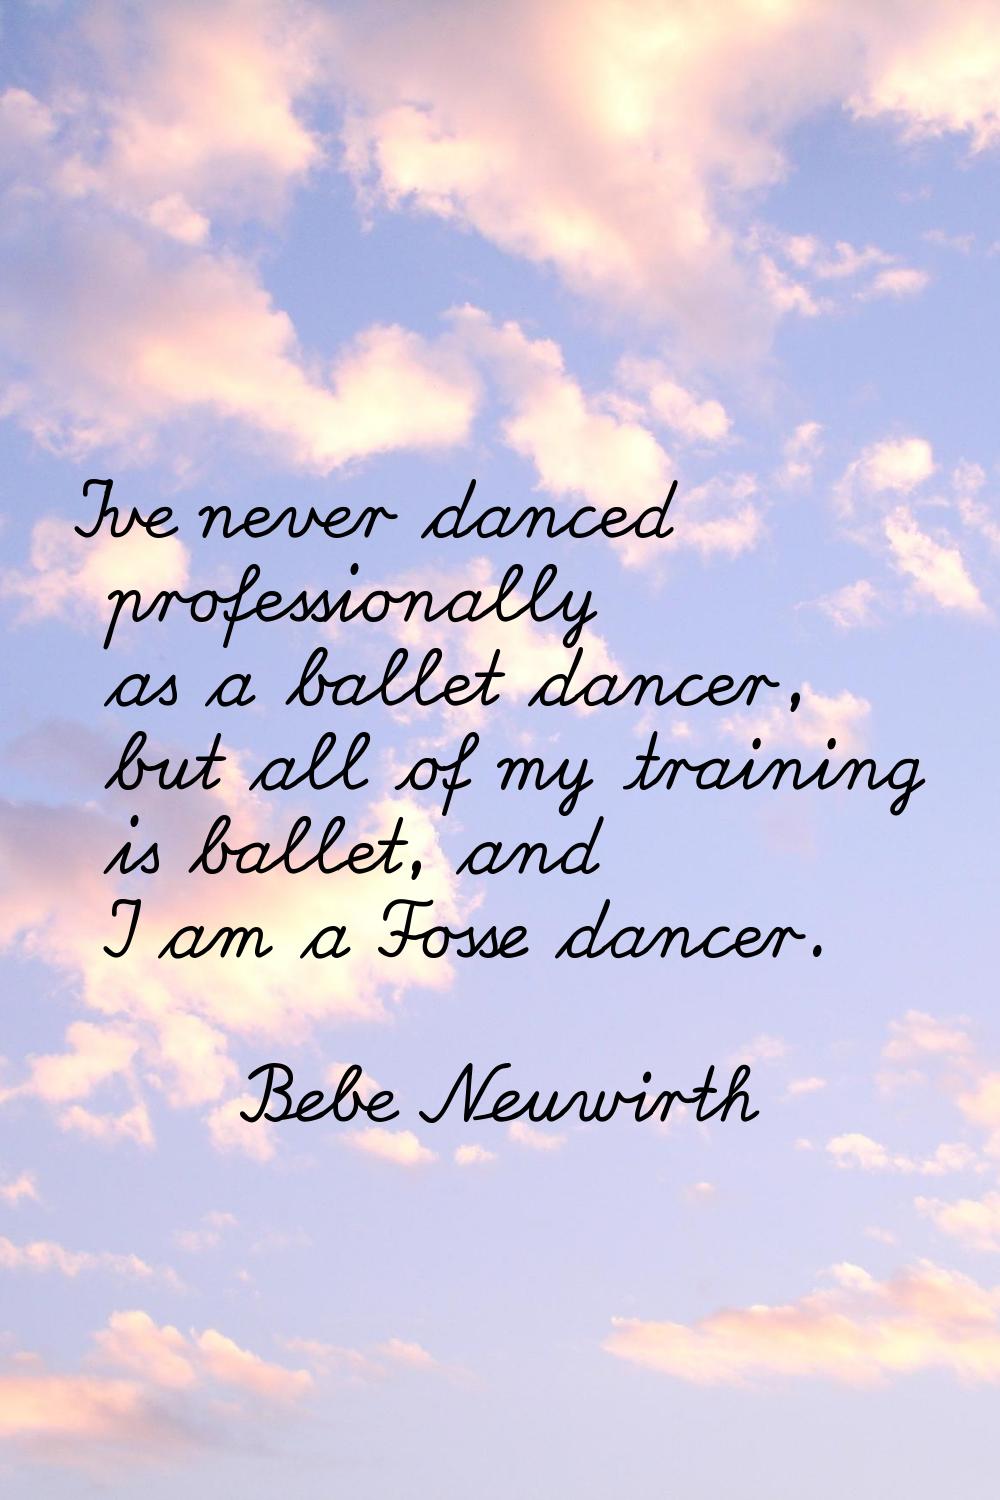 I've never danced professionally as a ballet dancer, but all of my training is ballet, and I am a F